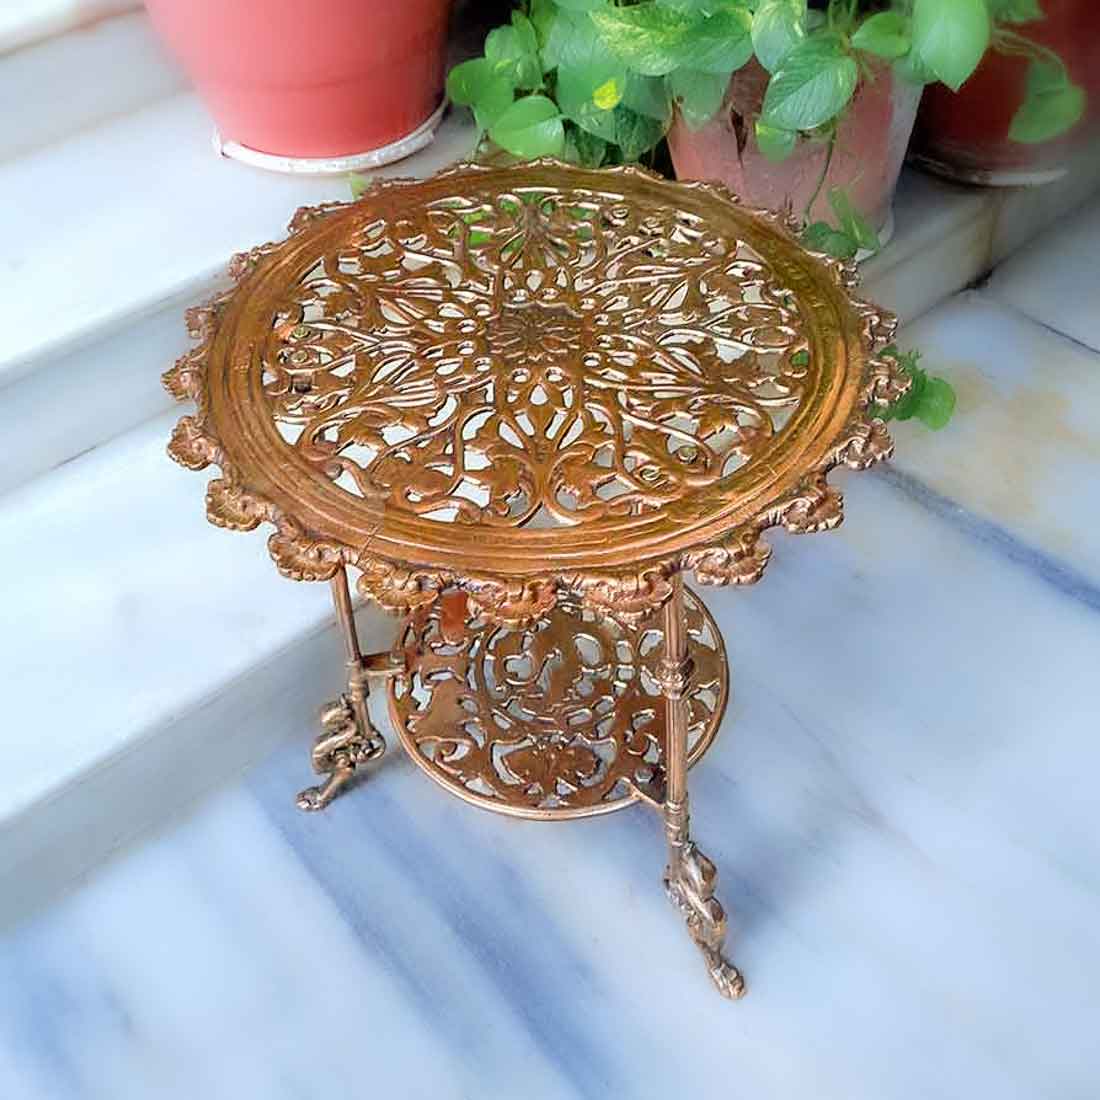 Side Table | End Table In Metal | Coffee Tables - for Living Room, Bedside, Sofa Side Stool, Corners, Home Decor & Gifts | Vintage Center Table - 17 Inch